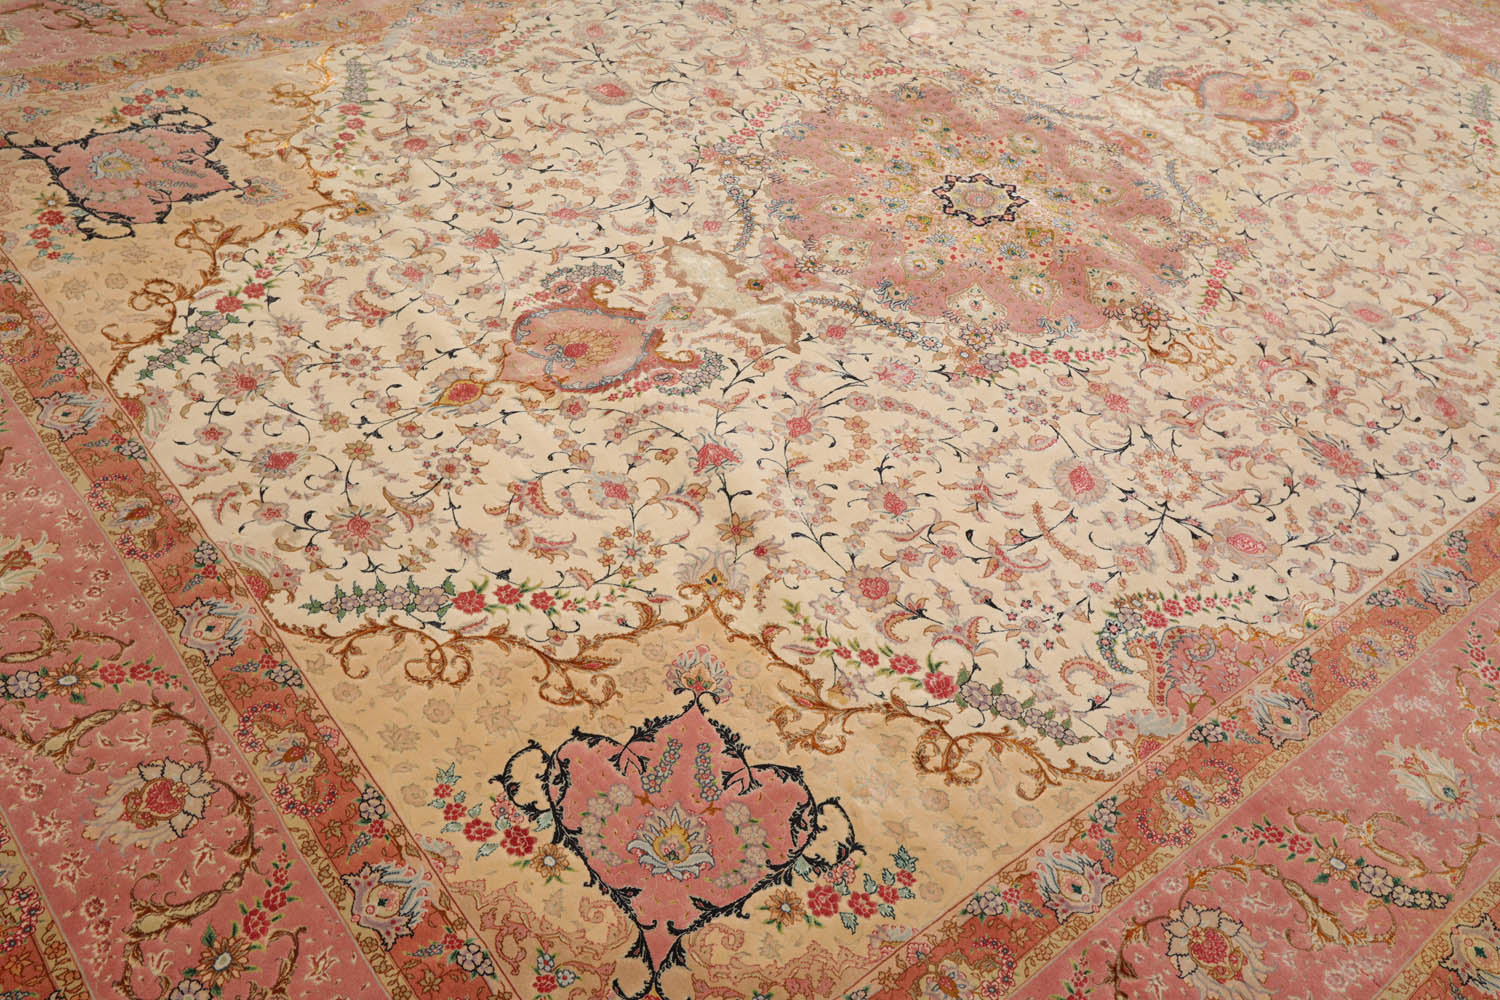 Wenham 10x14 Hand Knotted Persian Wool and Silk Traditional Tabriz Master Weaver 350 KPSI Oriental Area Rug Ivory,Blush Color